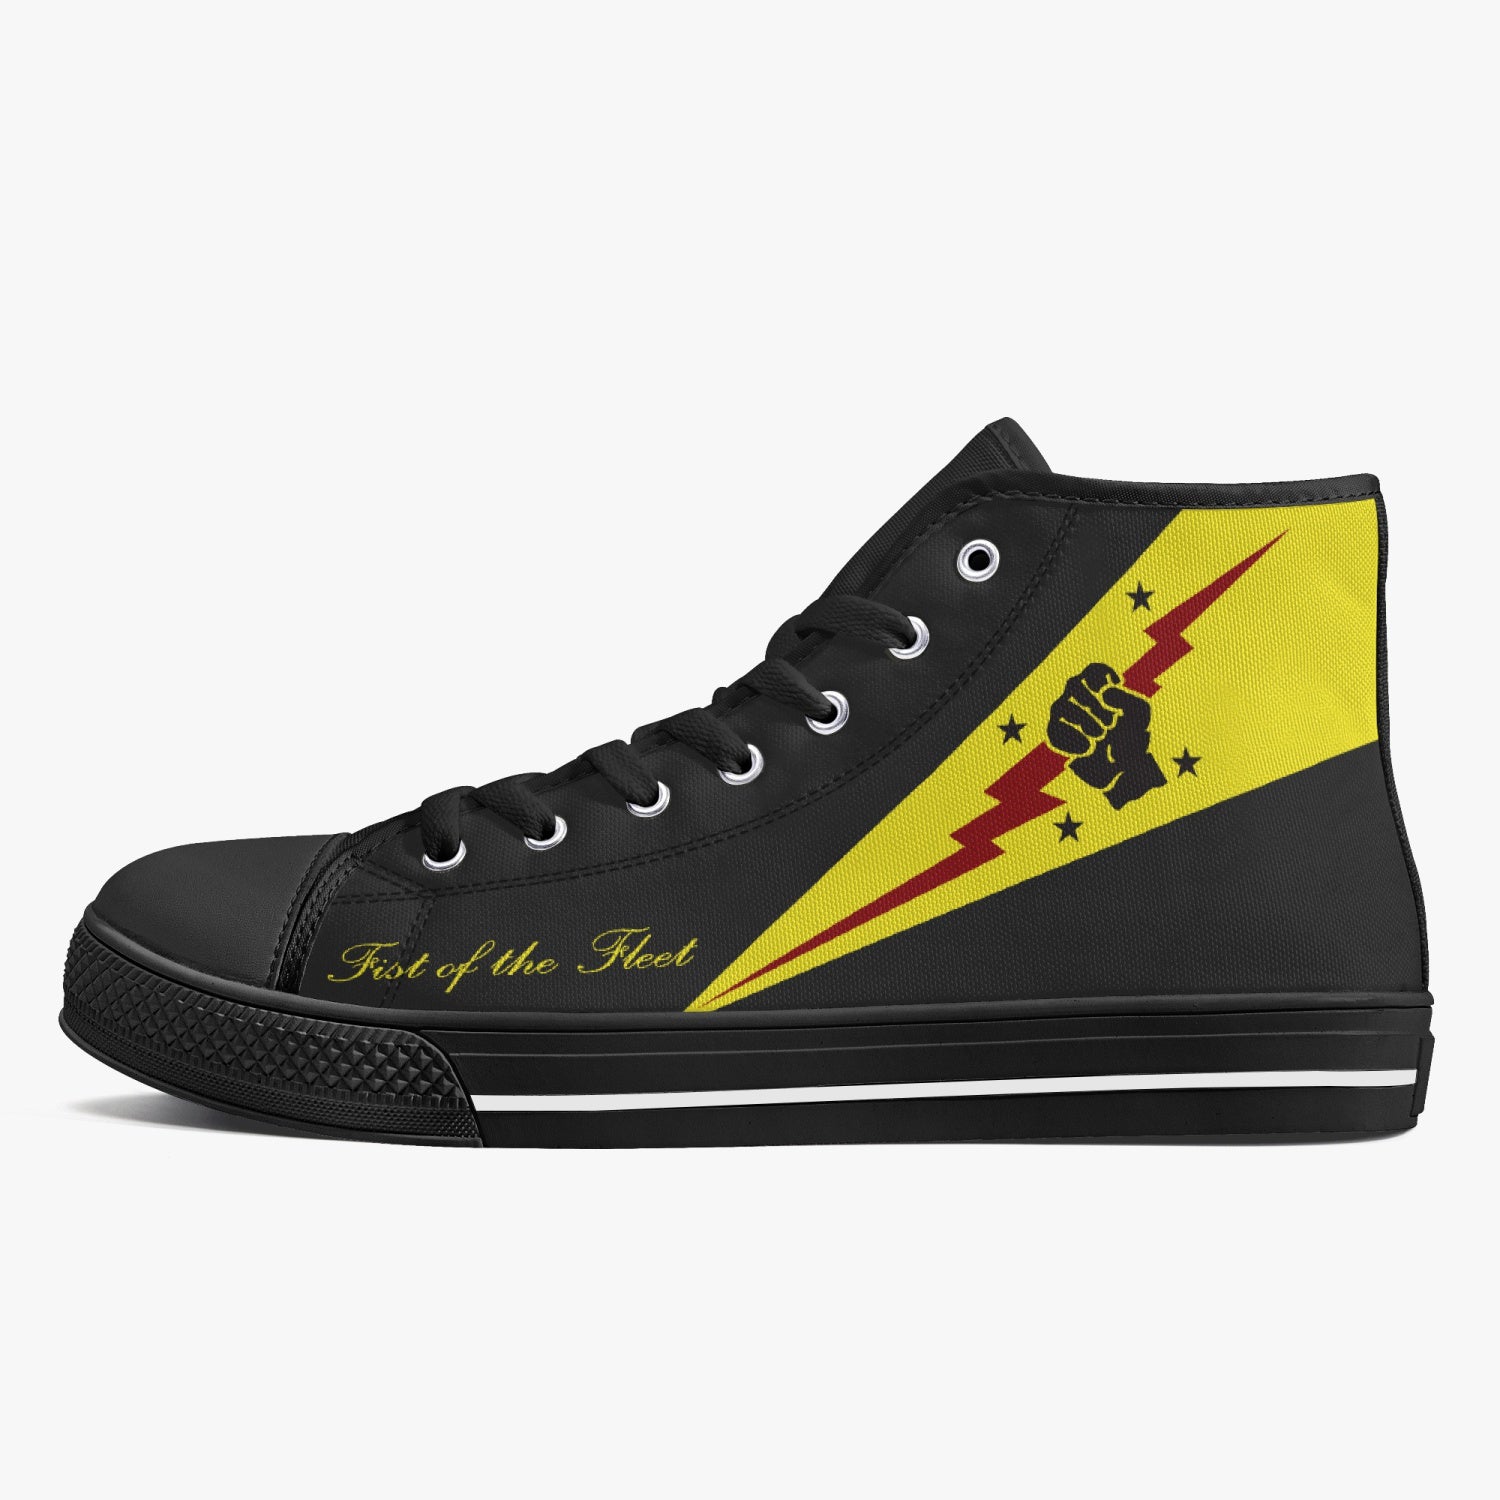 VFA-25 "Fist of the Fleet" High Top Canvas Shoes